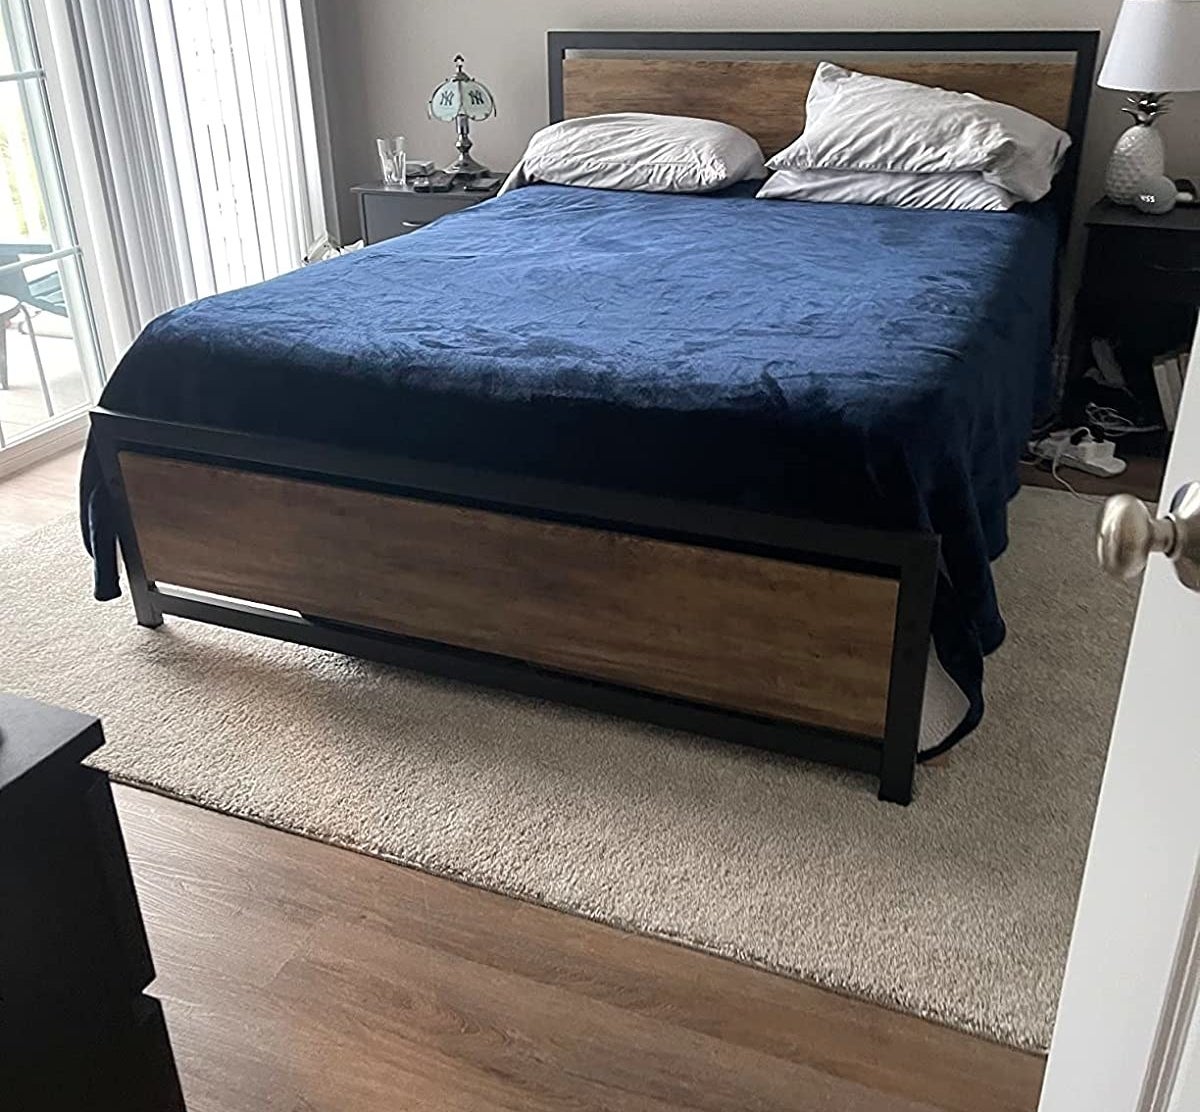 A reviewer&#x27;s photo of the bedframe with a mattress and duvet covers.